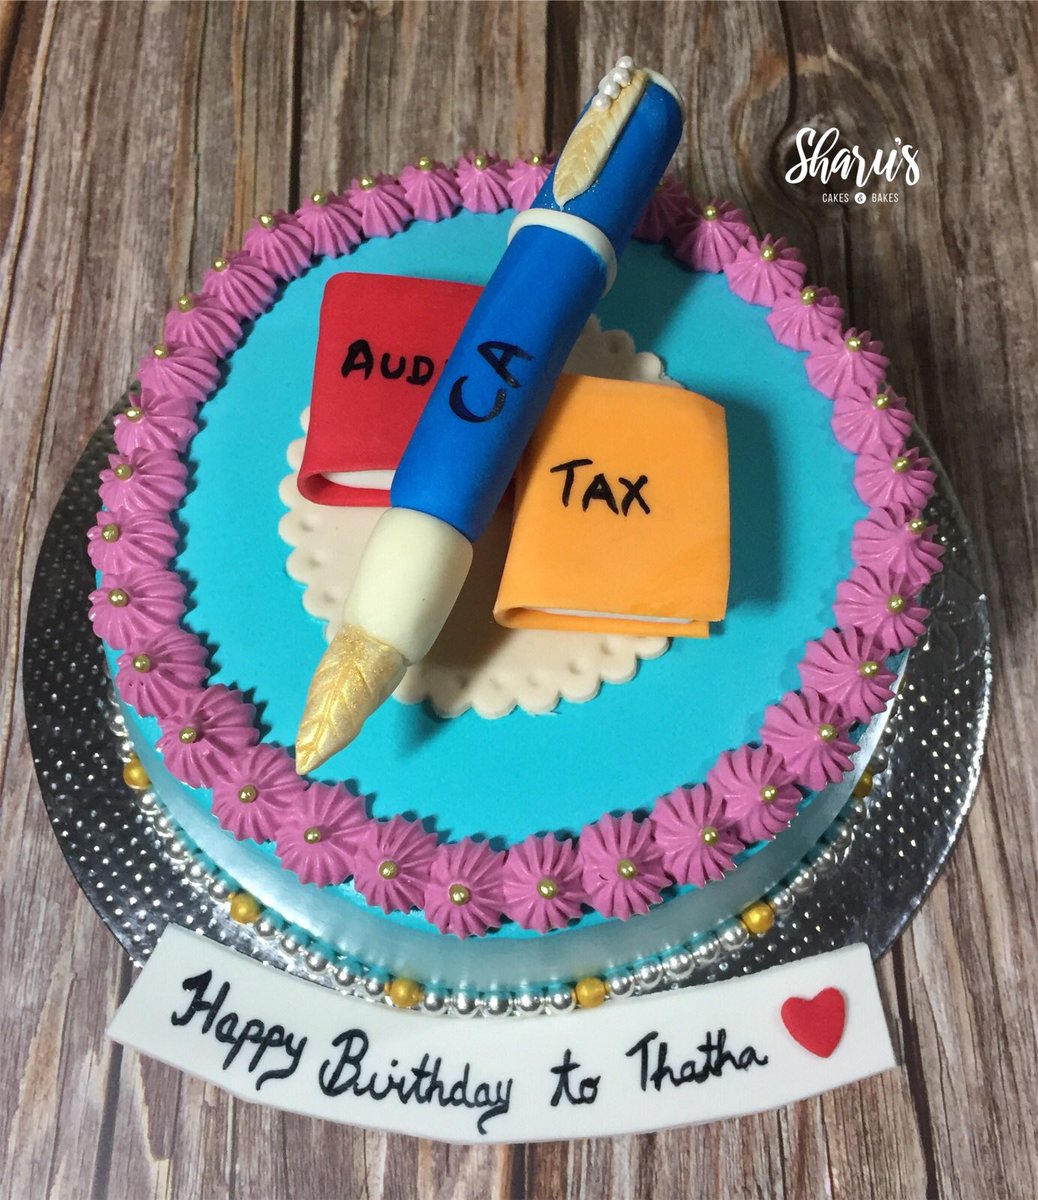 Finance theme customized designer fondant cake for a CA Chartered  accountant's birthday | Cake for husband, Themed birthday cakes, Cake